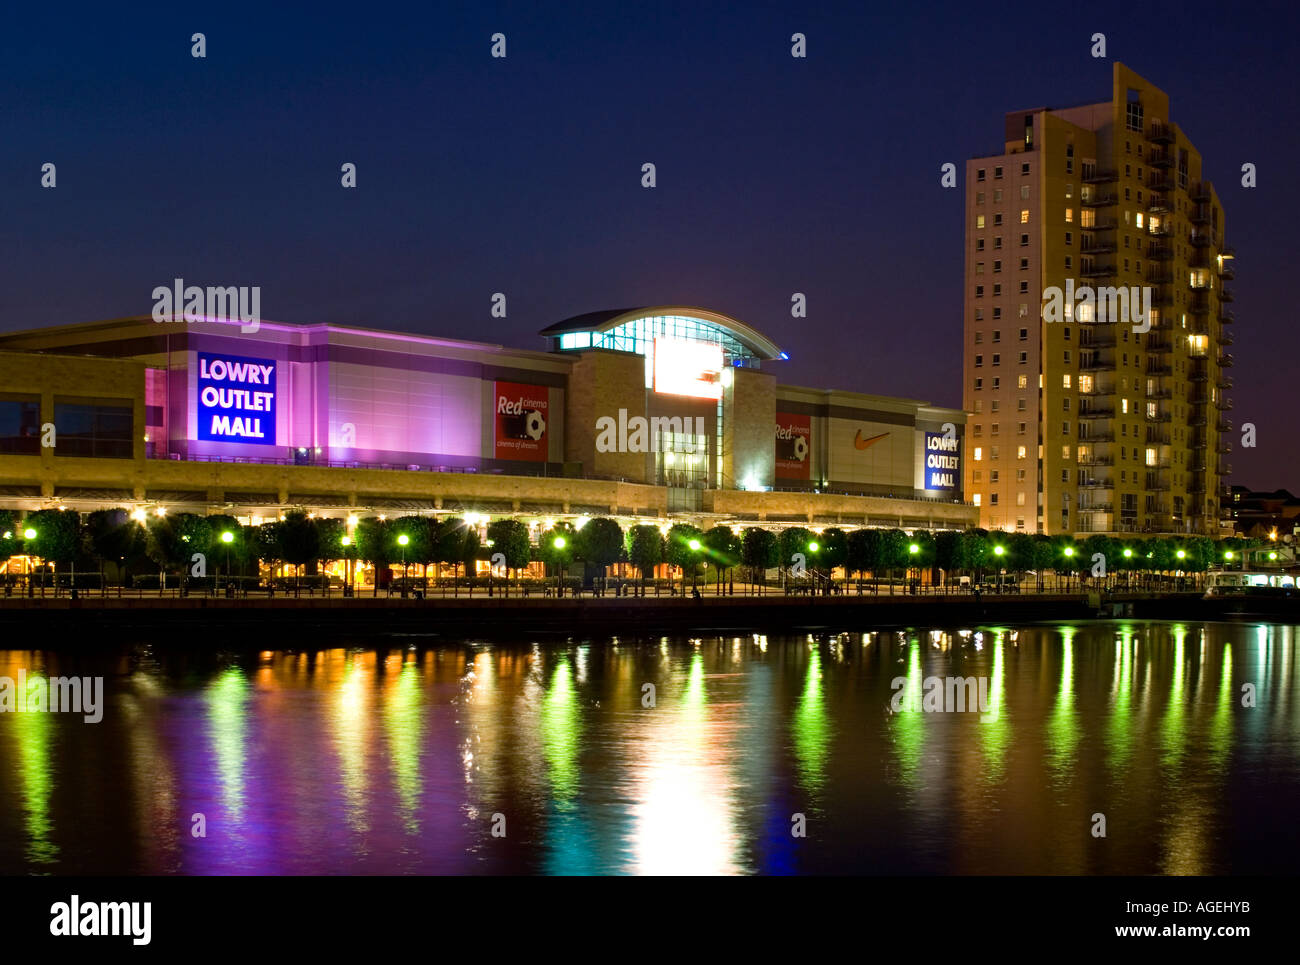 Le Lowry Outlet Shopping Mall at Night, Salford, Greater Manchester, Angleterre, RU Banque D'Images